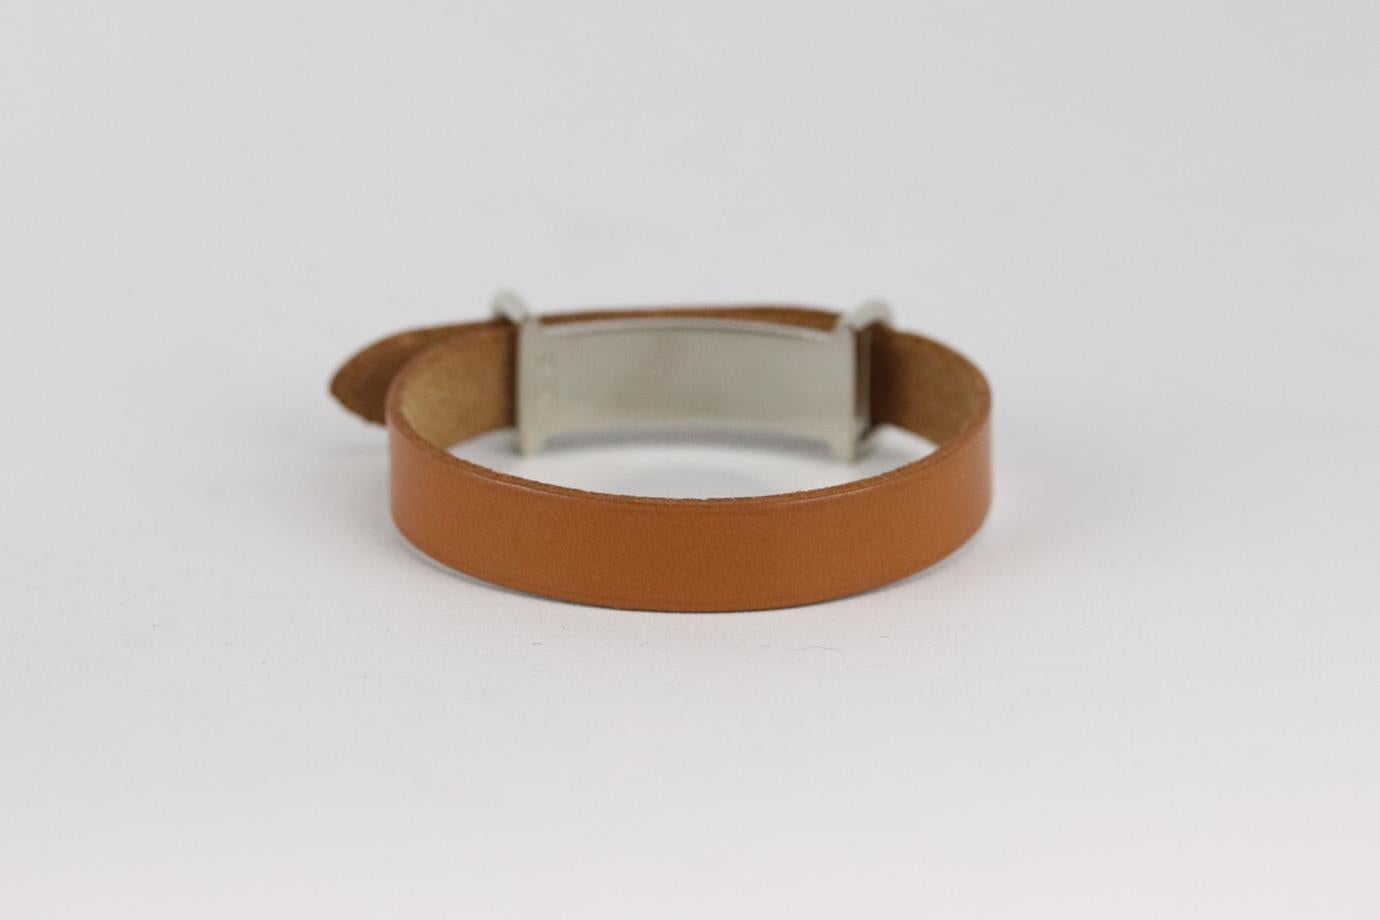 Hermès Idem leather bracelet. Tan. Buckle fastening at front. Does not come with box or dustbag. Min. Length: 7 in. Max. Length: 7.6 in. Very good condition - No sign of wear; see pictures.
